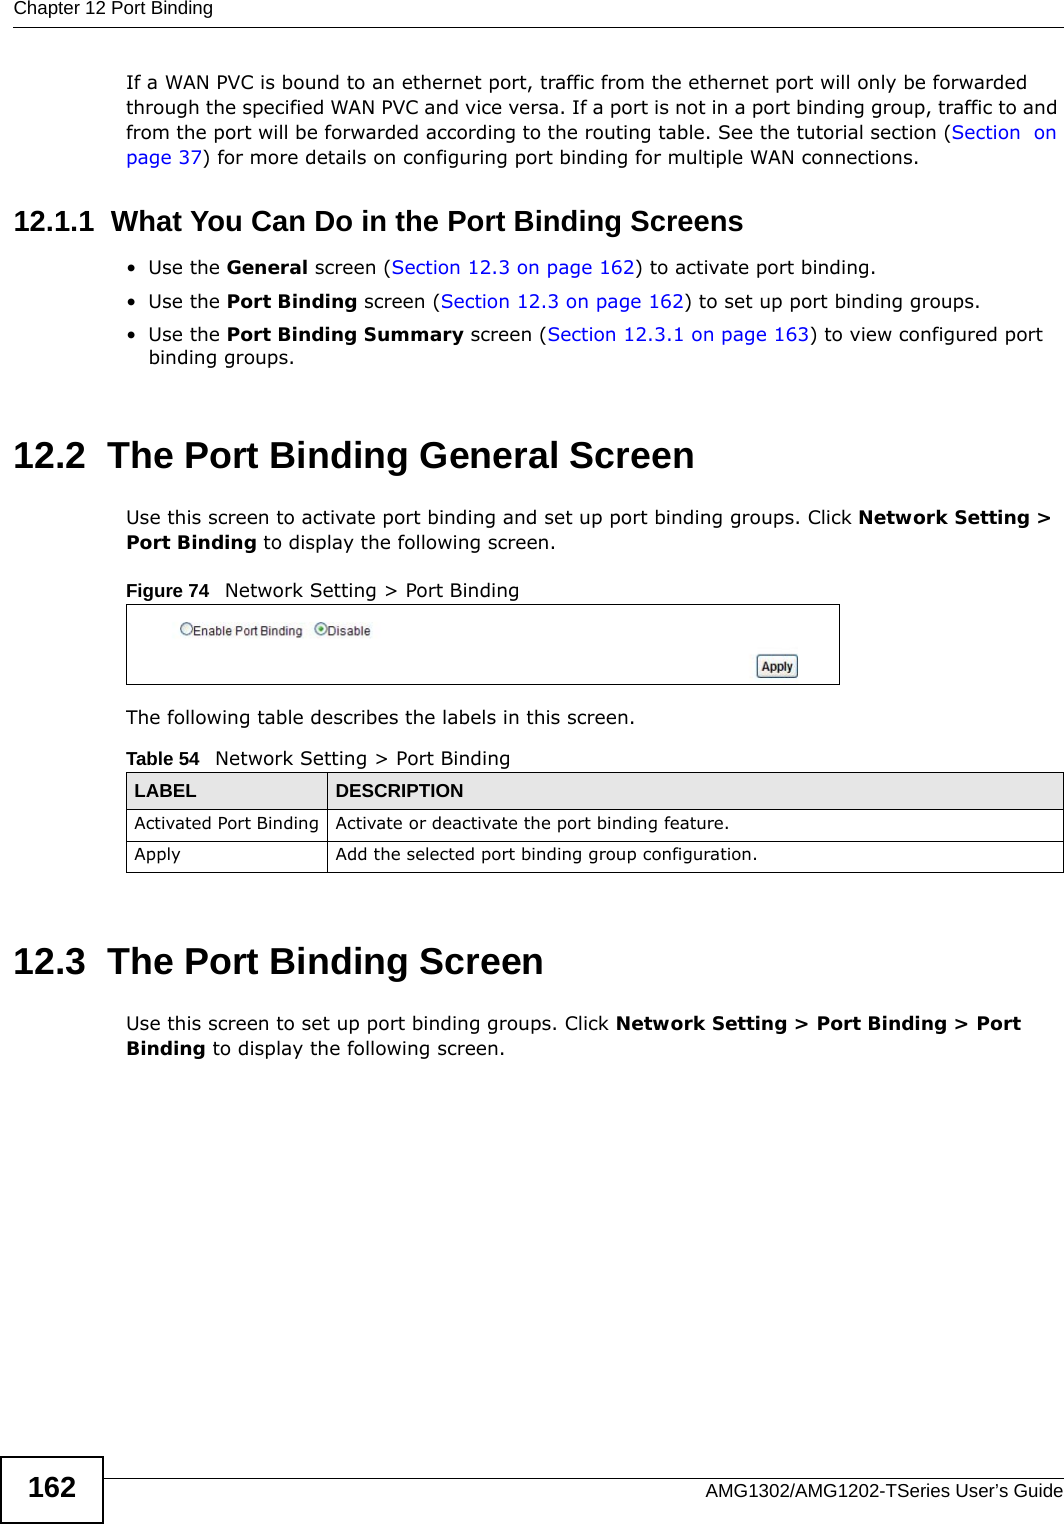 Chapter 12 Port BindingAMG1302/AMG1202-TSeries User’s Guide162If a WAN PVC is bound to an ethernet port, traffic from the ethernet port will only be forwarded through the specified WAN PVC and vice versa. If a port is not in a port binding group, traffic to and from the port will be forwarded according to the routing table. See the tutorial section (Section  on page 37) for more details on configuring port binding for multiple WAN connections.12.1.1  What You Can Do in the Port Binding Screens•Use the General screen (Section 12.3 on page 162) to activate port binding.•Use the Port Binding screen (Section 12.3 on page 162) to set up port binding groups.•Use the Port Binding Summary screen (Section 12.3.1 on page 163) to view configured port binding groups.12.2  The Port Binding General ScreenUse this screen to activate port binding and set up port binding groups. Click Network Setting &gt; Port Binding to display the following screen.Figure 74   Network Setting &gt; Port BindingThe following table describes the labels in this screen. 12.3  The Port Binding ScreenUse this screen to set up port binding groups. Click Network Setting &gt; Port Binding &gt; Port Binding to display the following screen.Table 54   Network Setting &gt; Port BindingLABEL DESCRIPTIONActivated Port Binding Activate or deactivate the port binding feature.Apply Add the selected port binding group configuration.